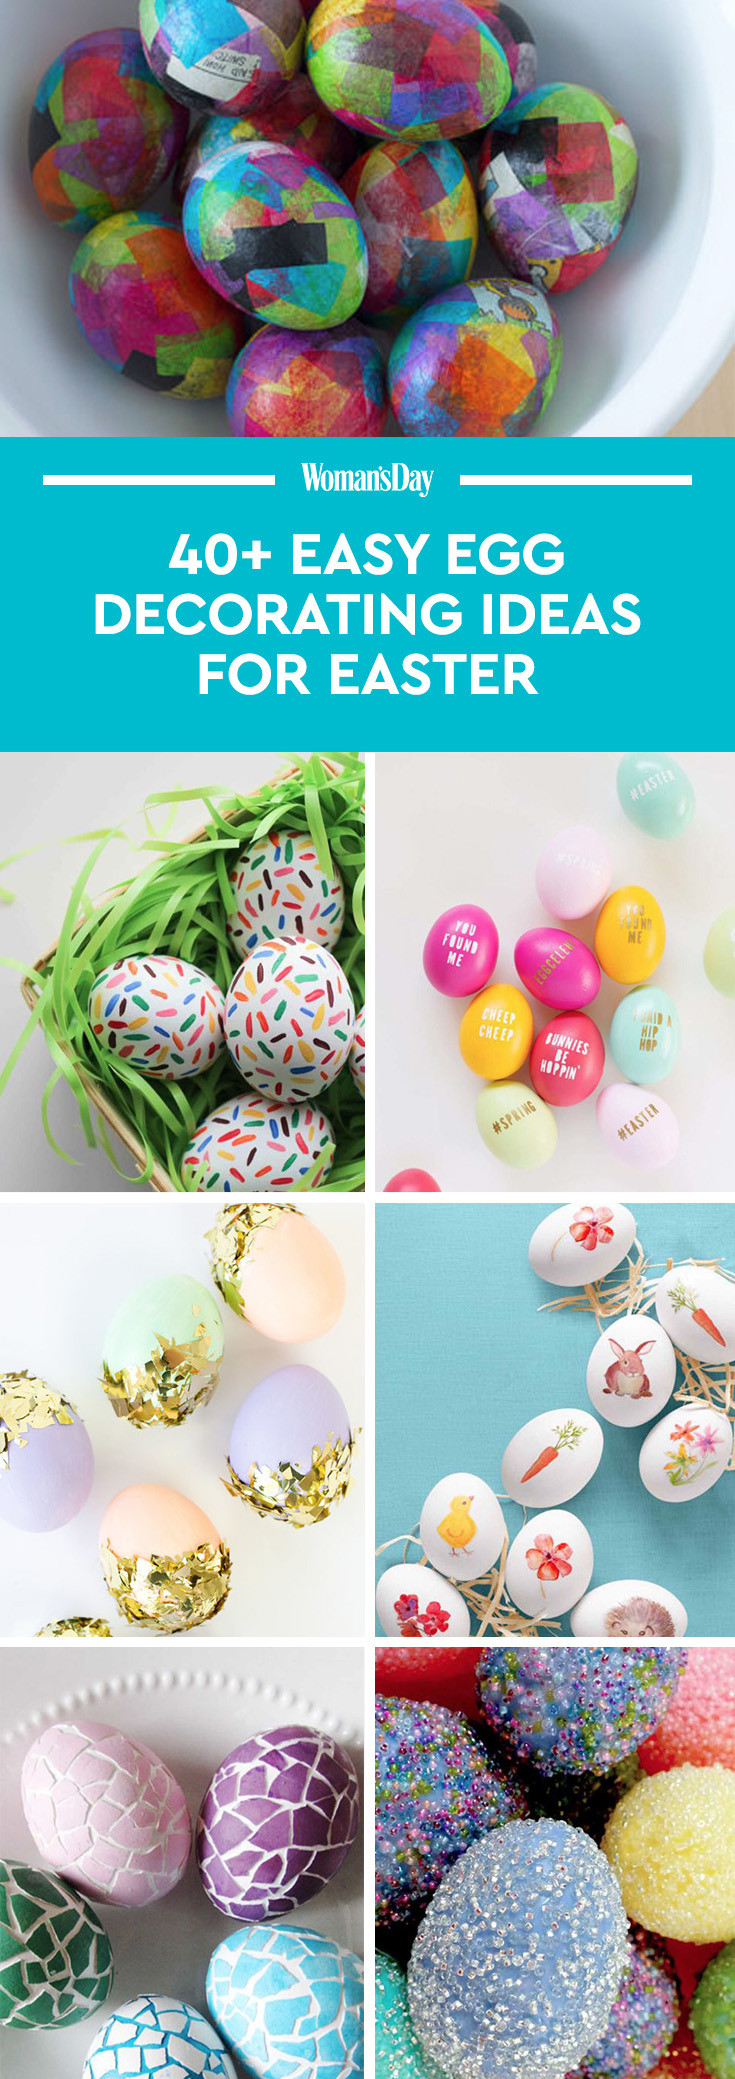 Easter Egg Party Ideas
 42 Cool Easter Egg Decorating Ideas Creative Designs for